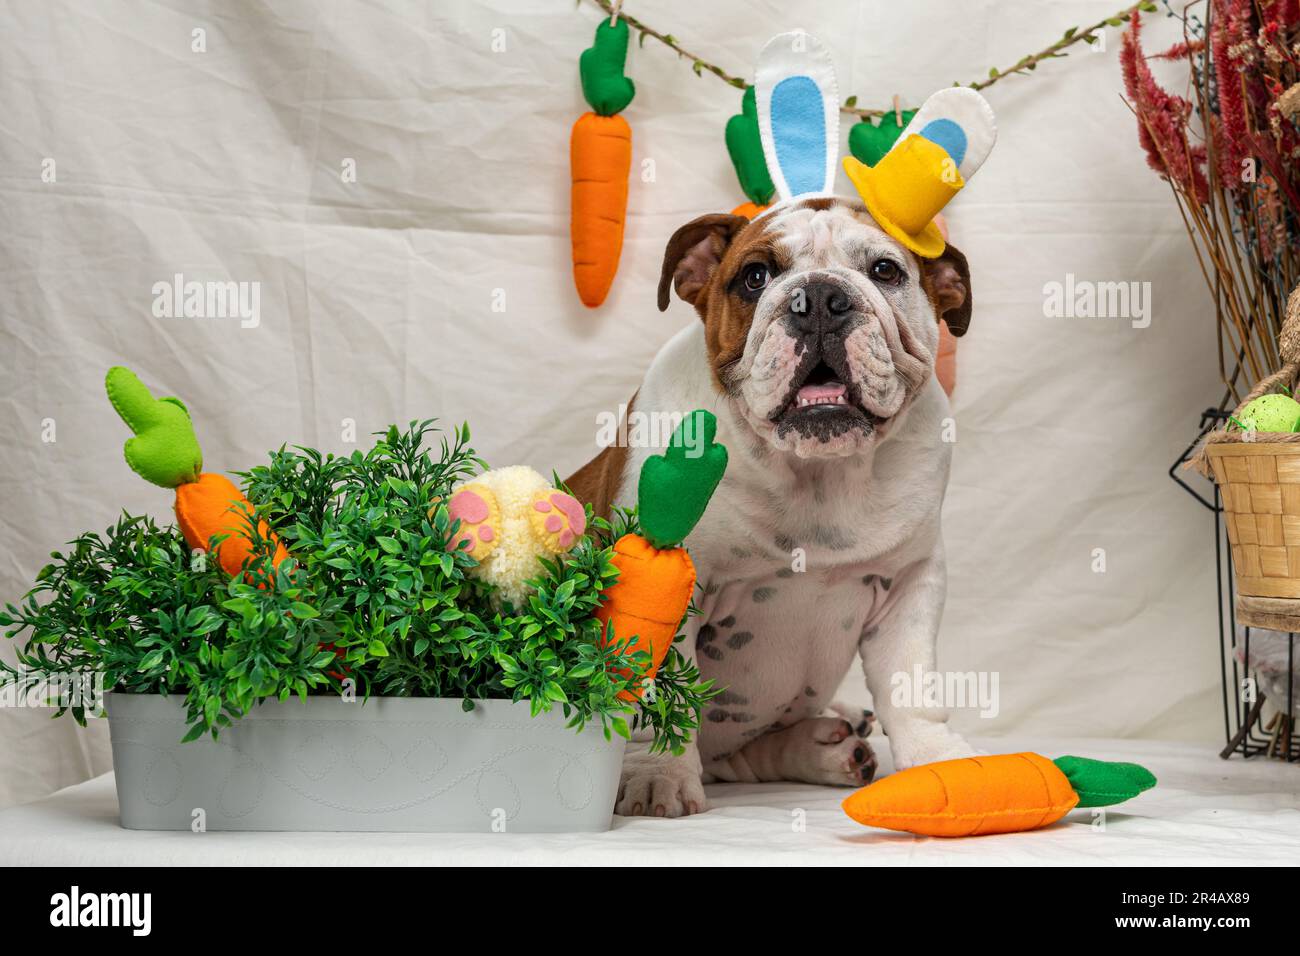 A brown and white bulldog sitting attentively beside a large metal pot filled with freshly-picked vegetables Stock Photo